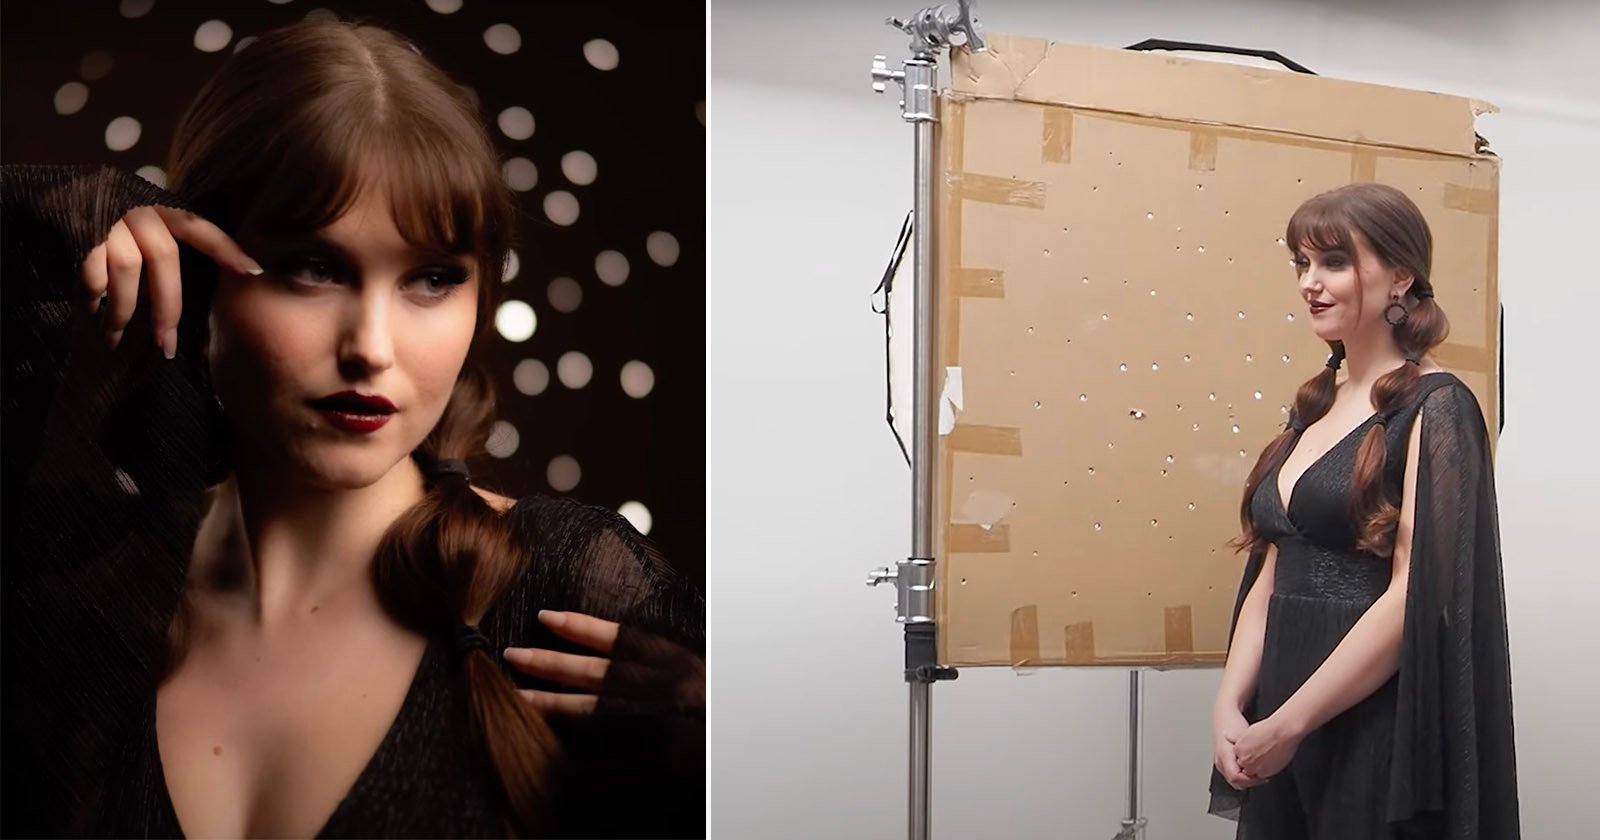  how recycle cardboard into creative photography backdrop 